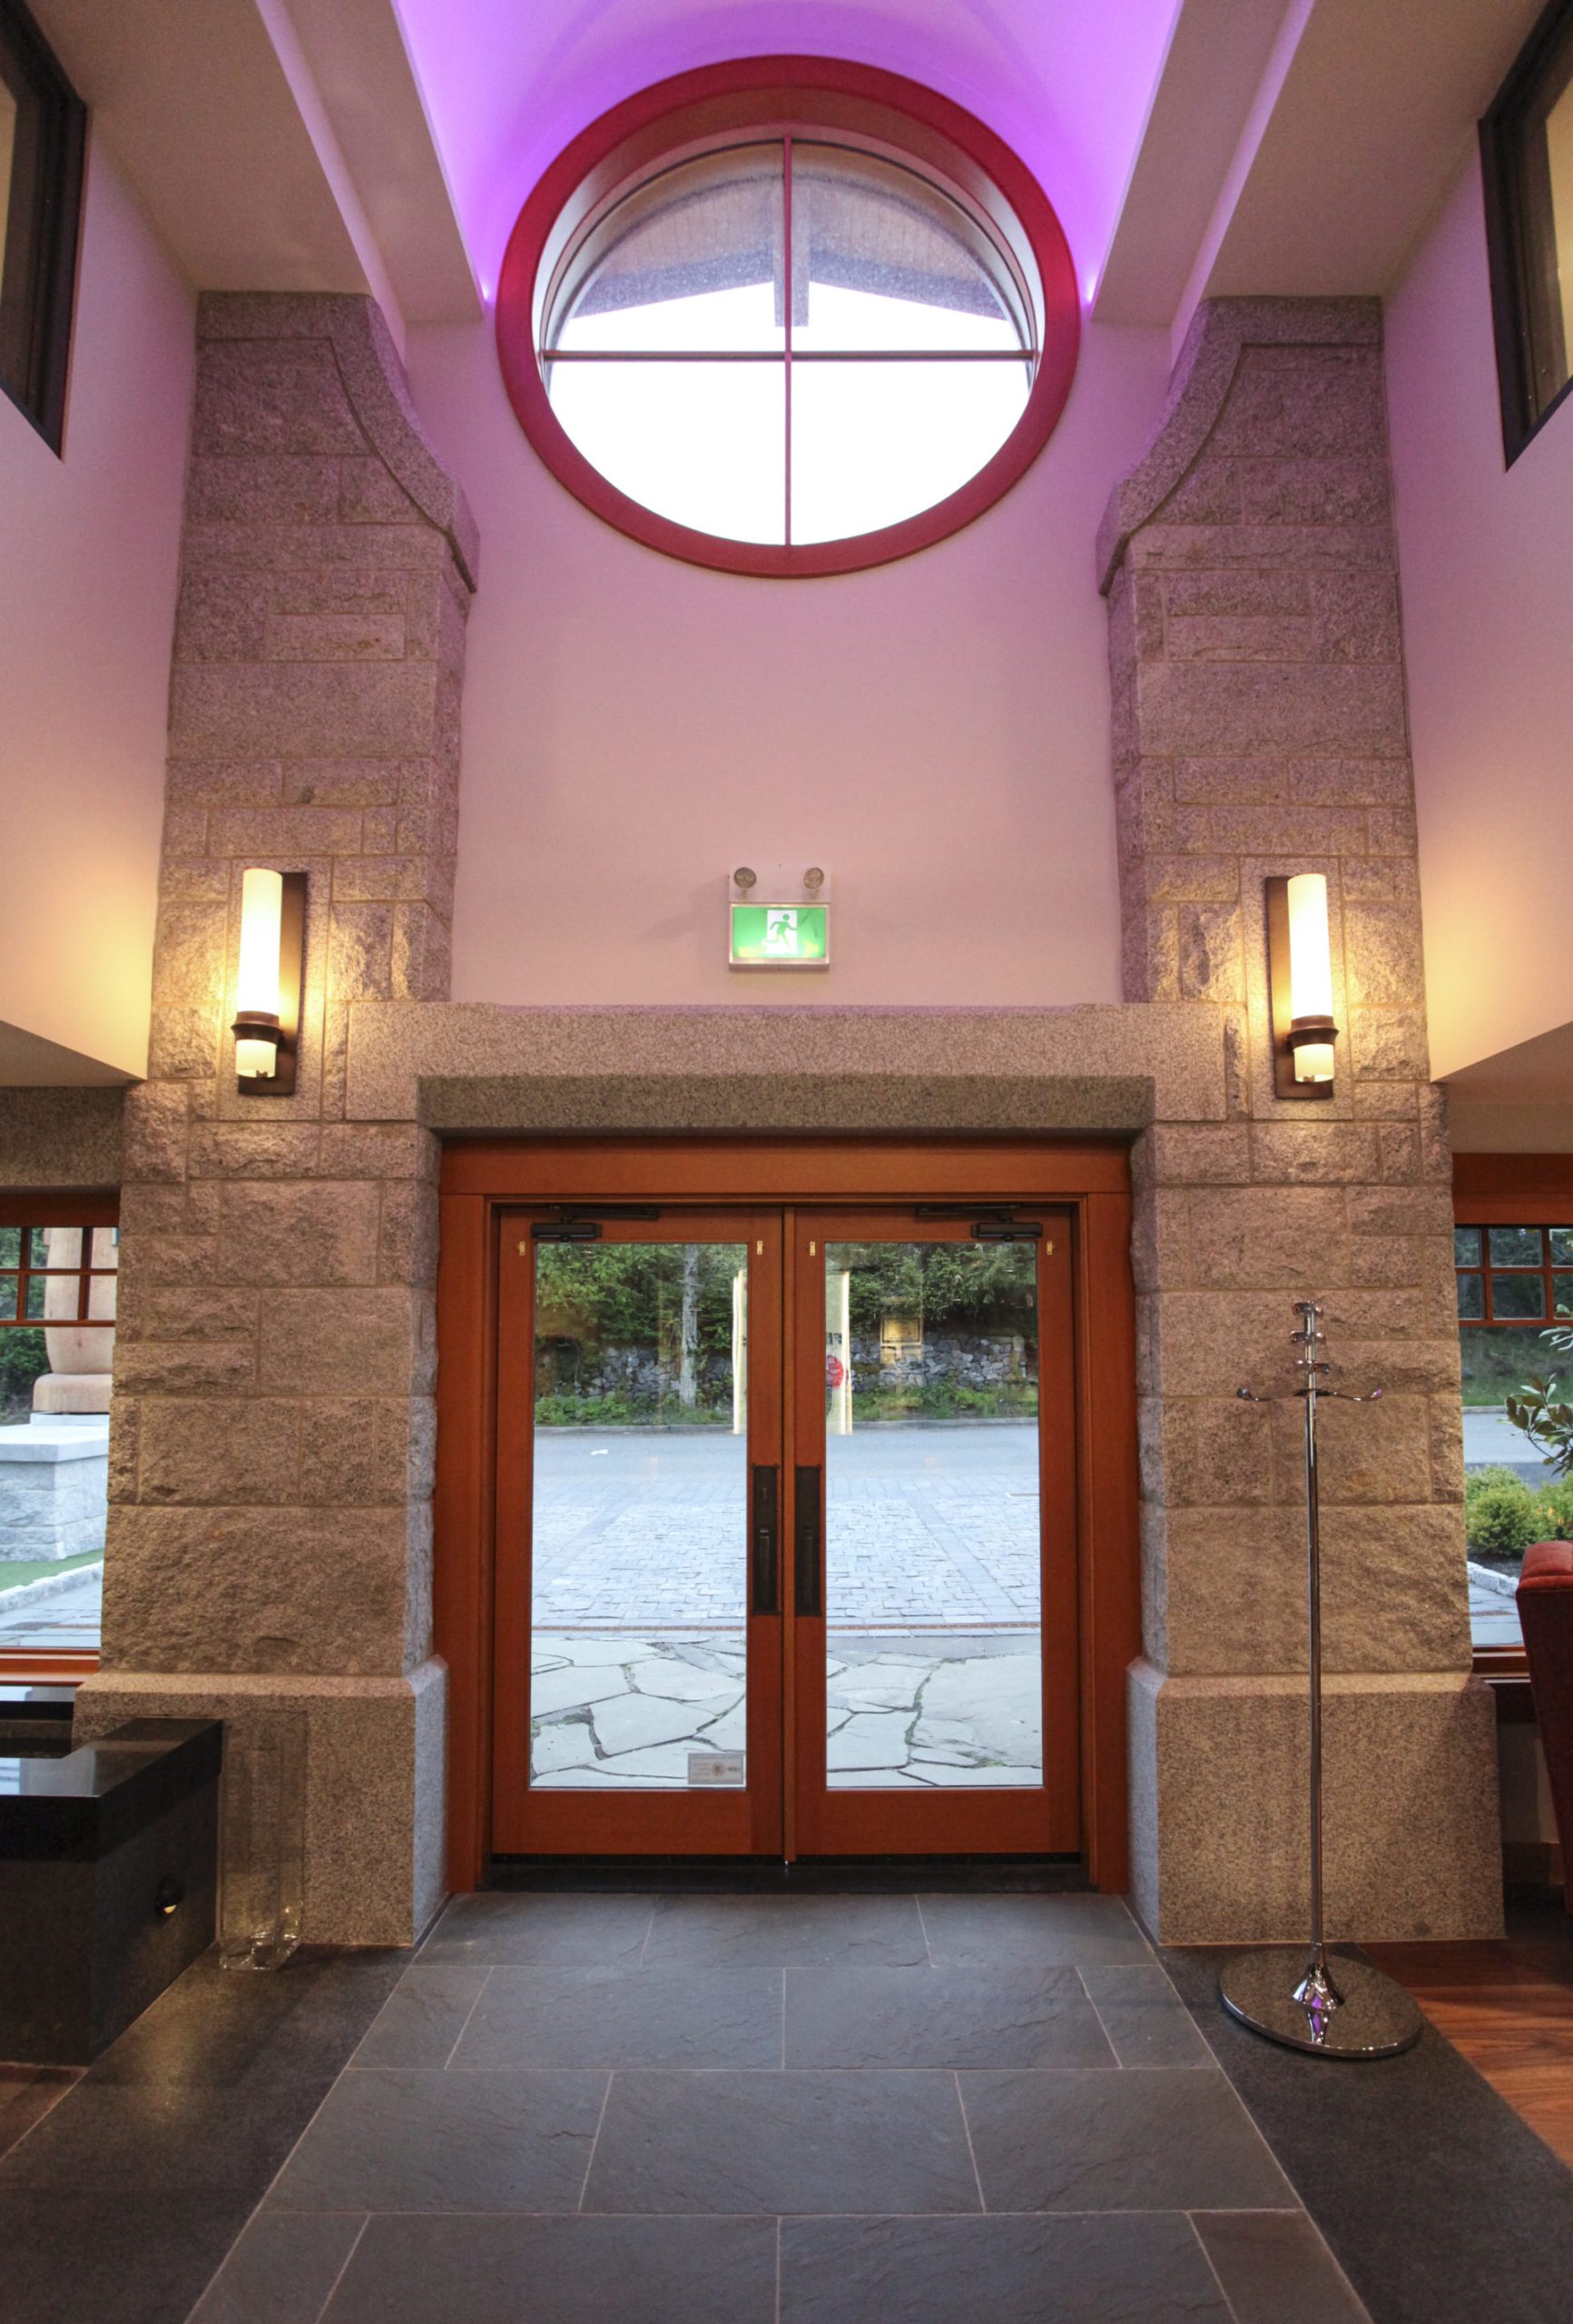 Double front doors with glass panels and a circular window in building looking outside